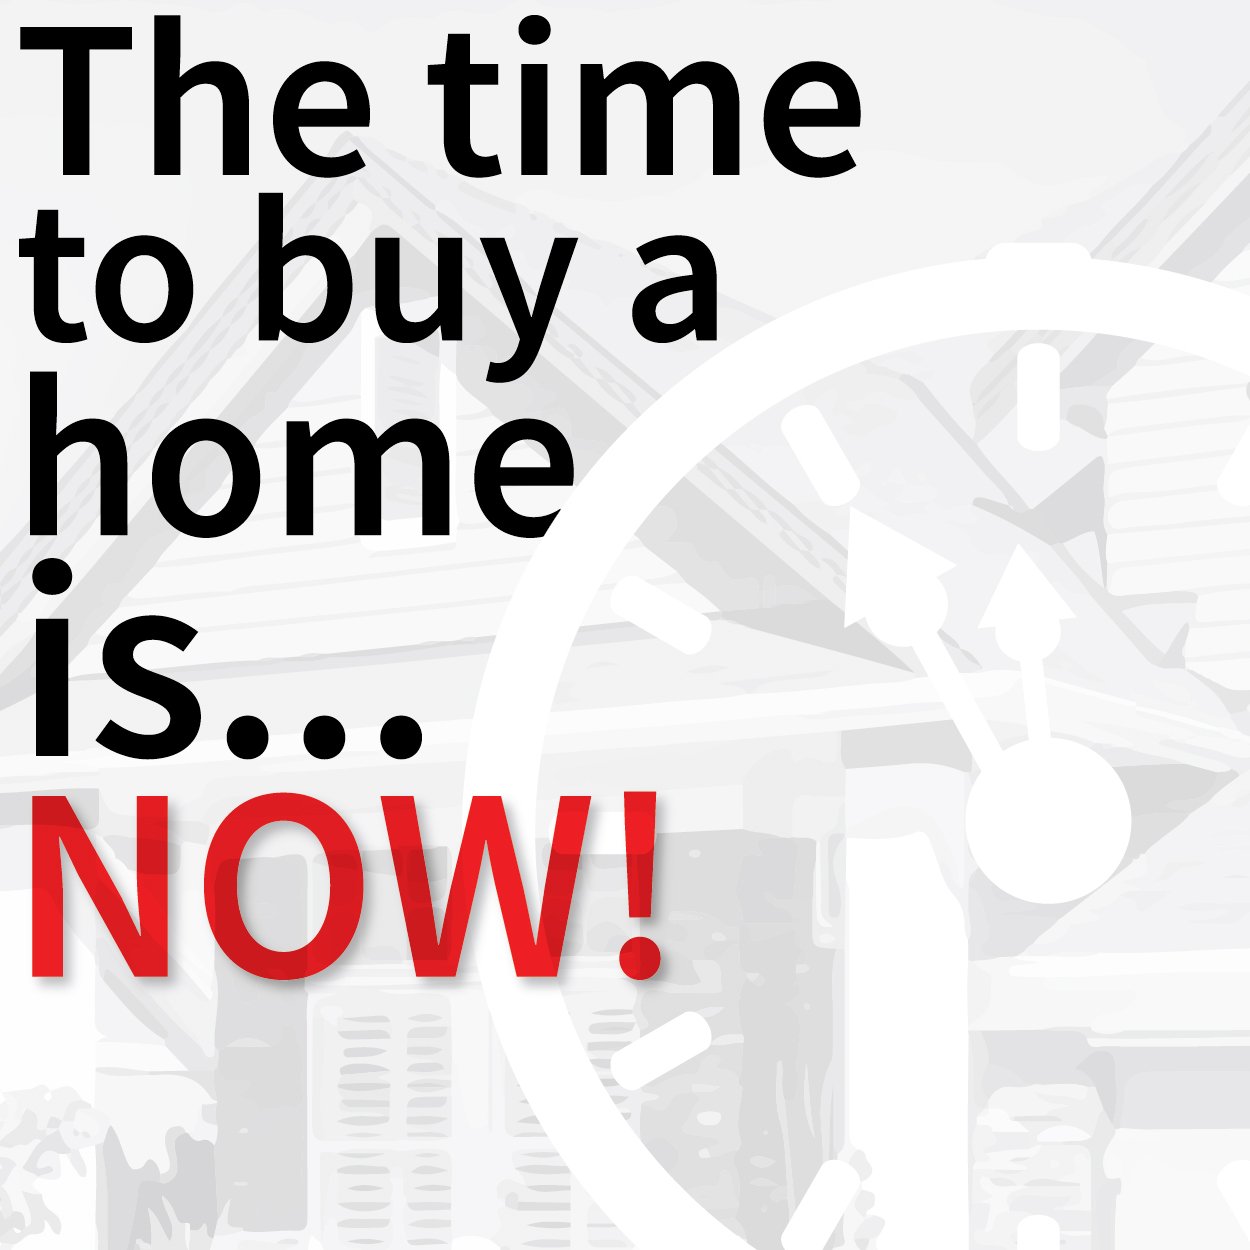 The time to buy a home is now